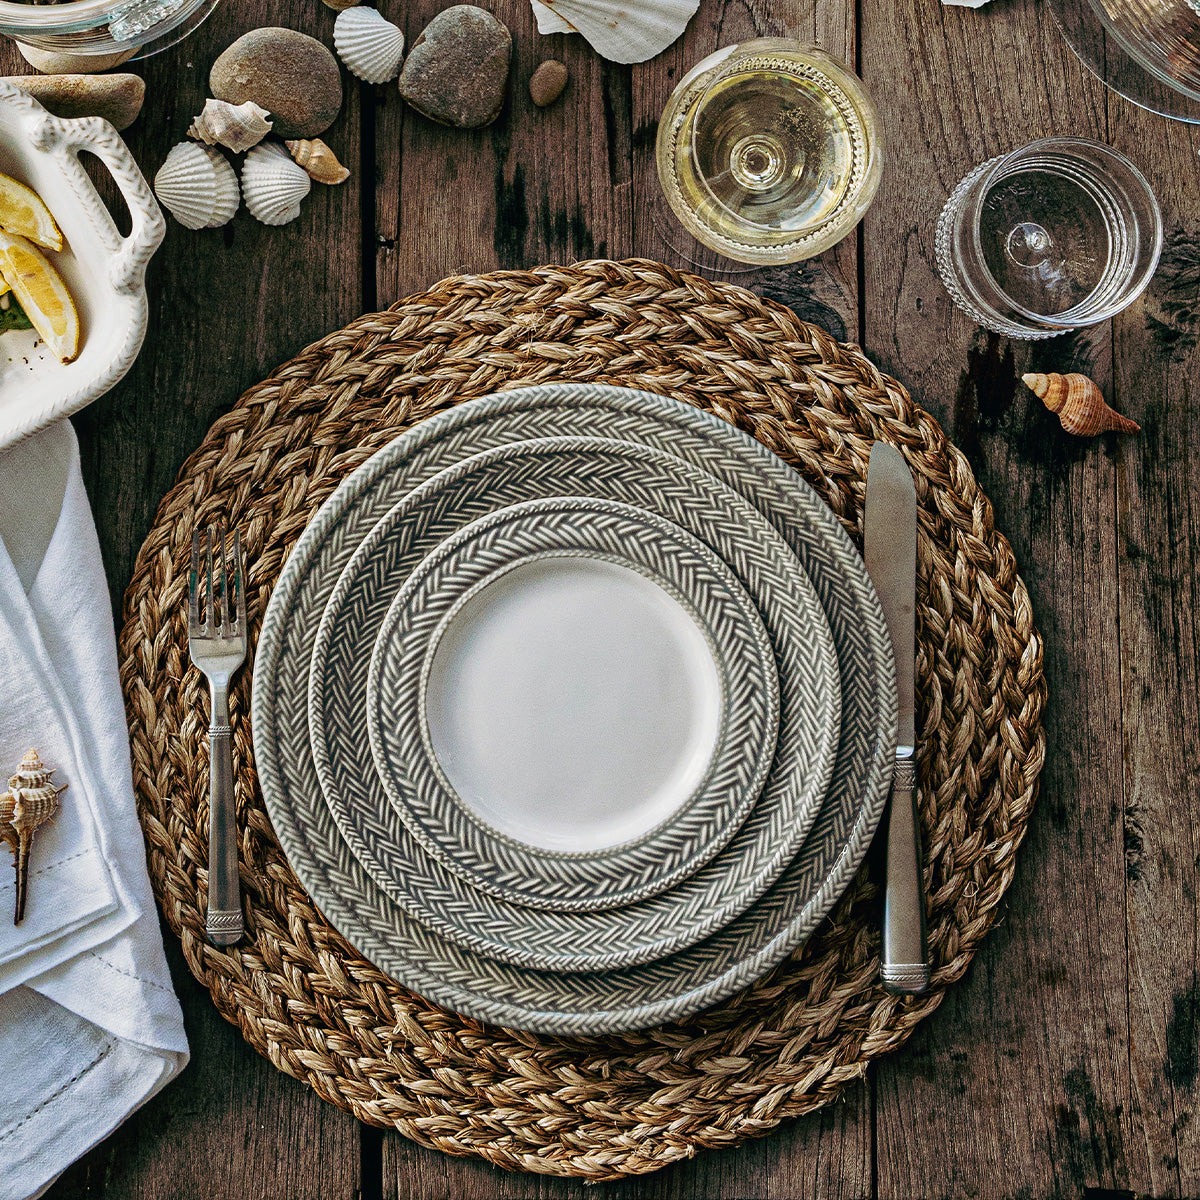 Woven Straw Placemat - Natural